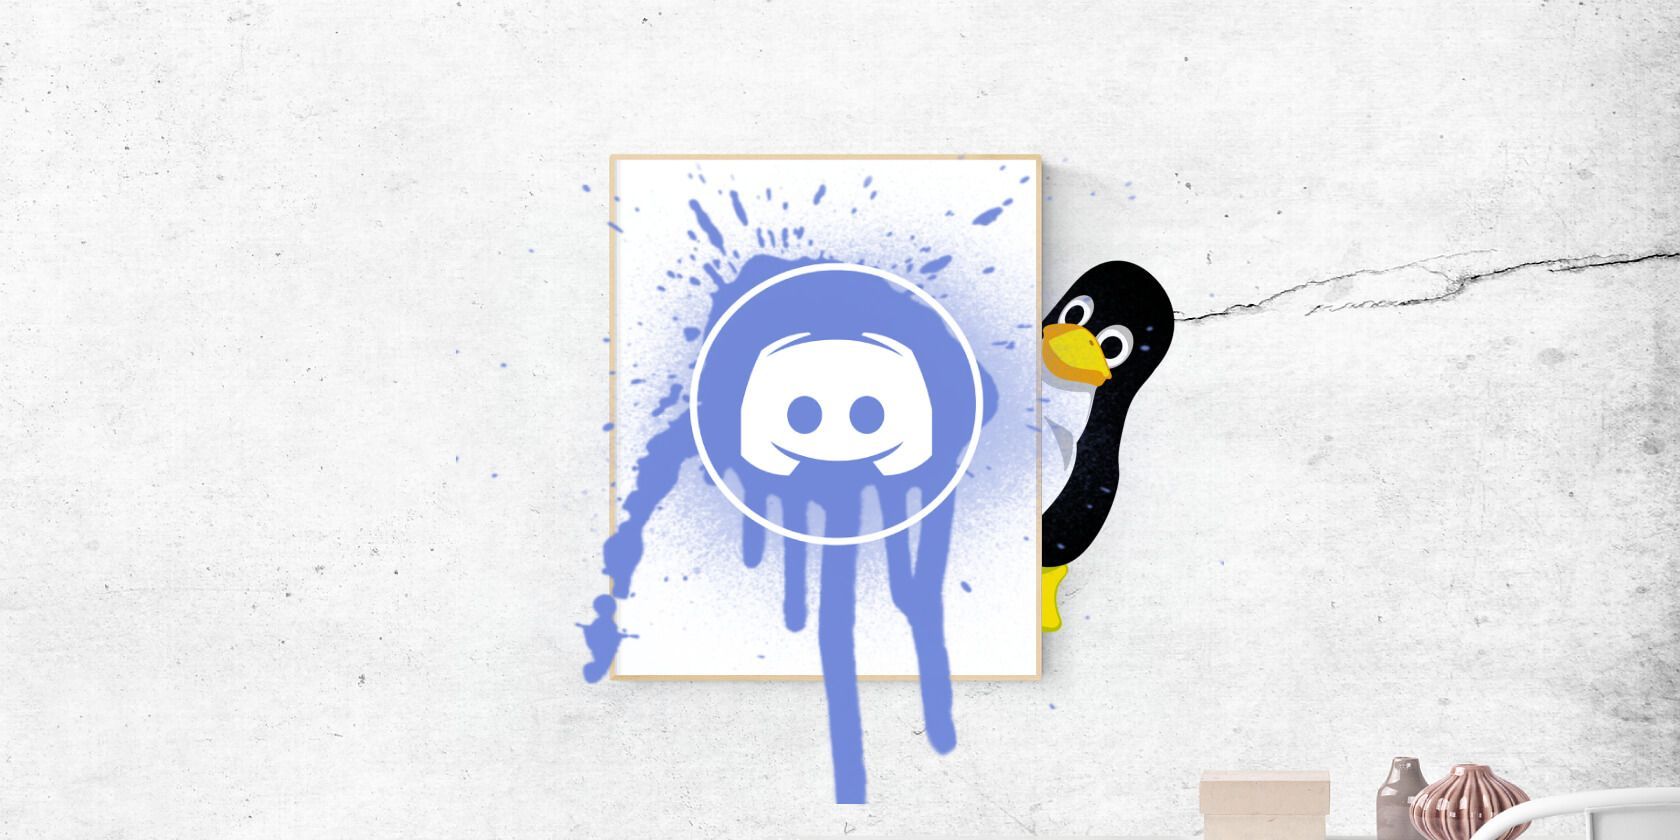 install discord linux